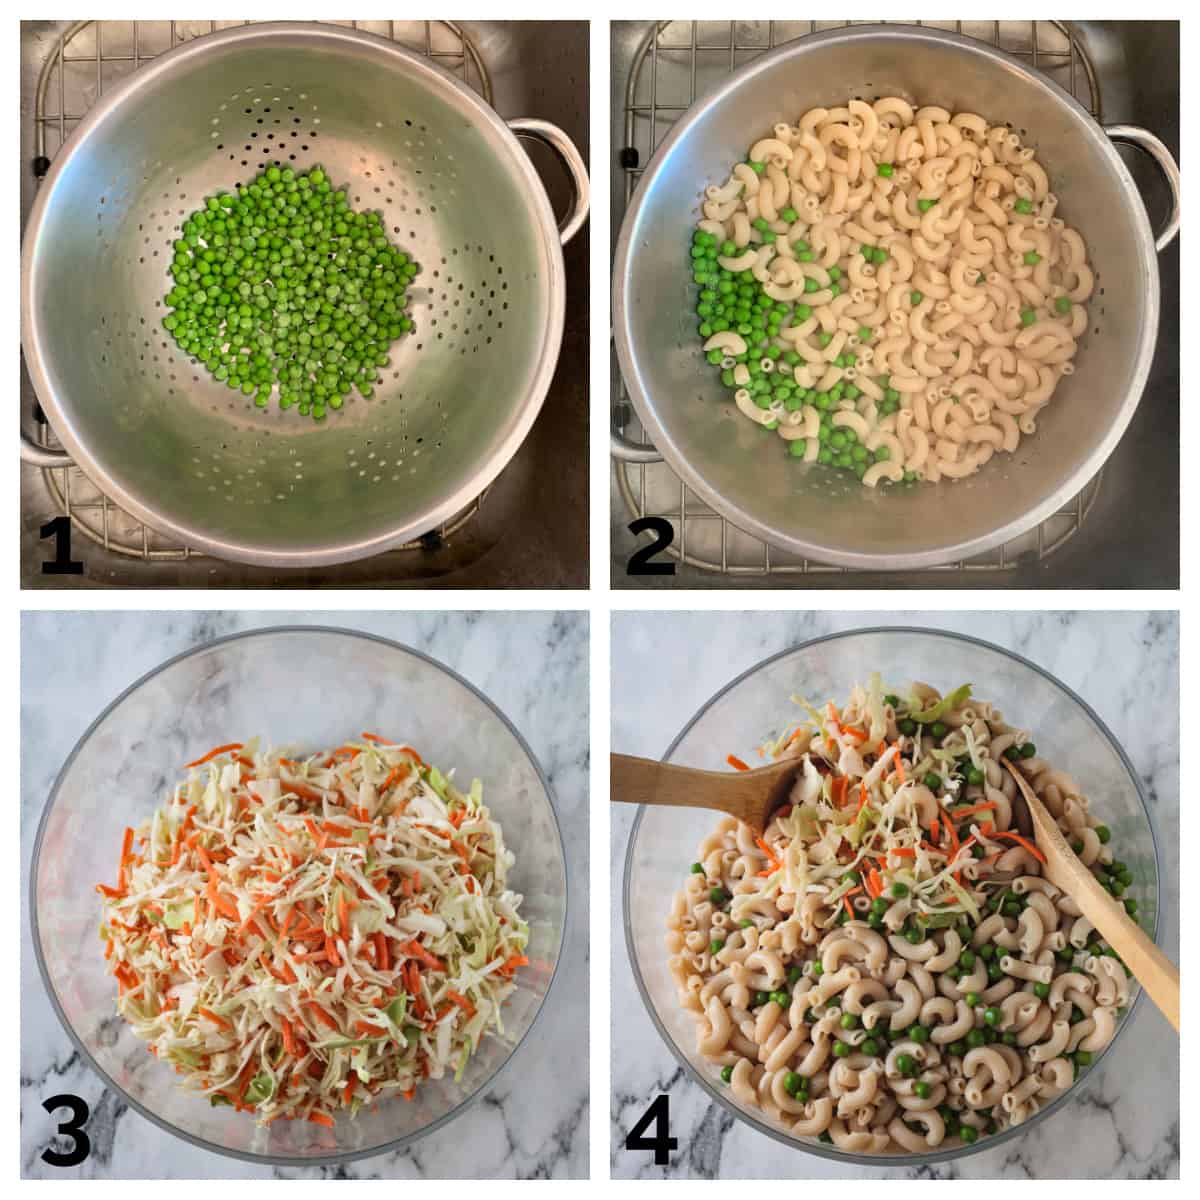 4 photo collage of draining peas and pasta and mixing with coleslaw.